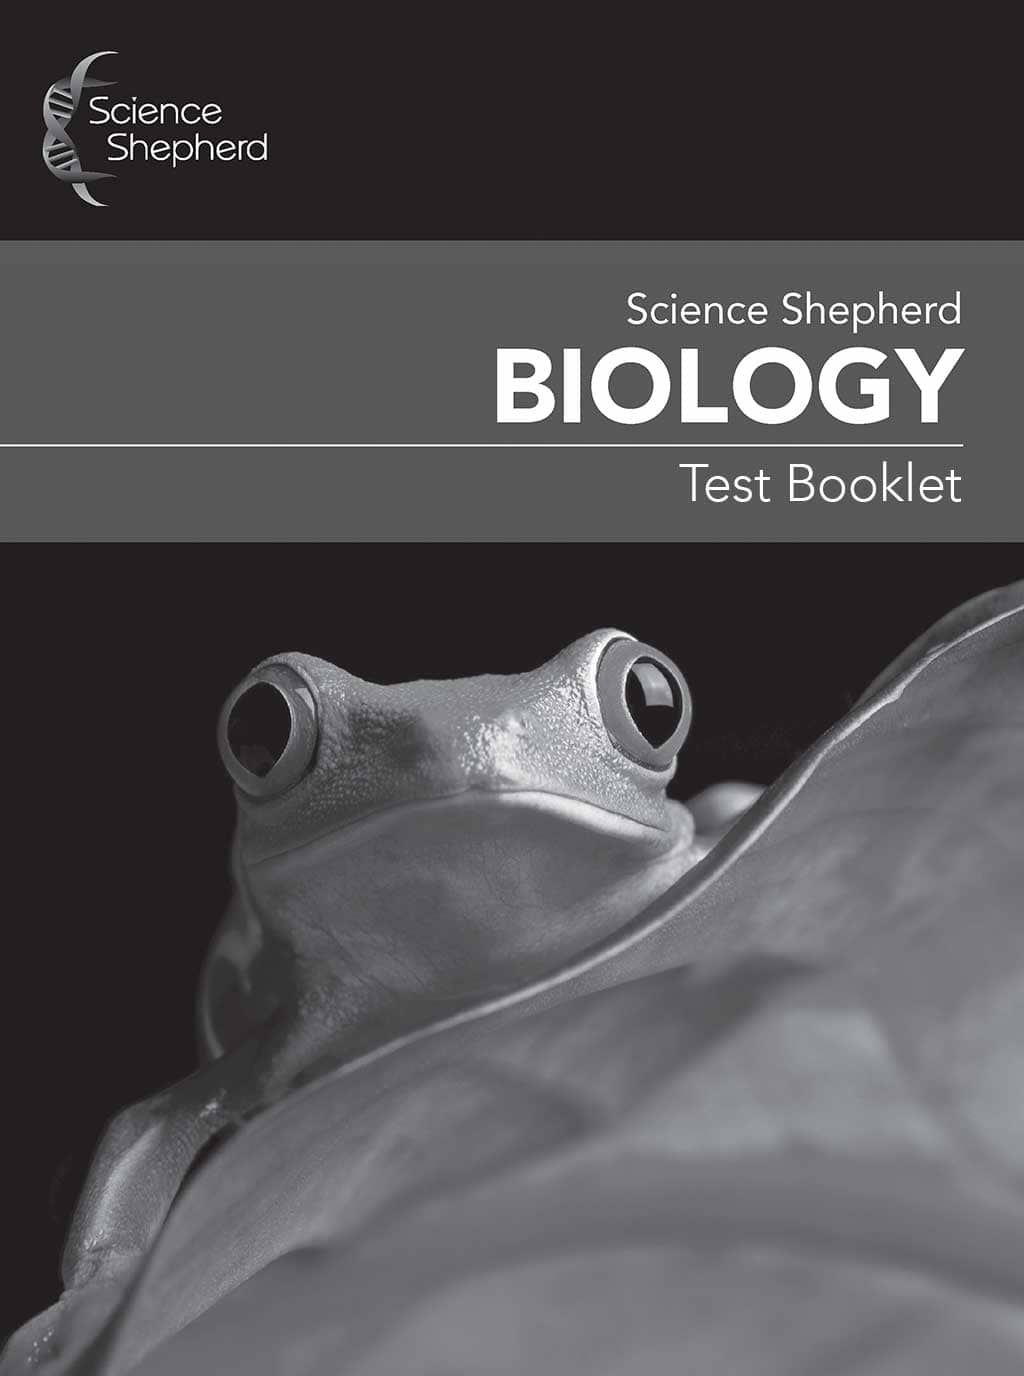 Science Shepherd Homeschool Biology High School Test Booklet cover of a grayscale frog